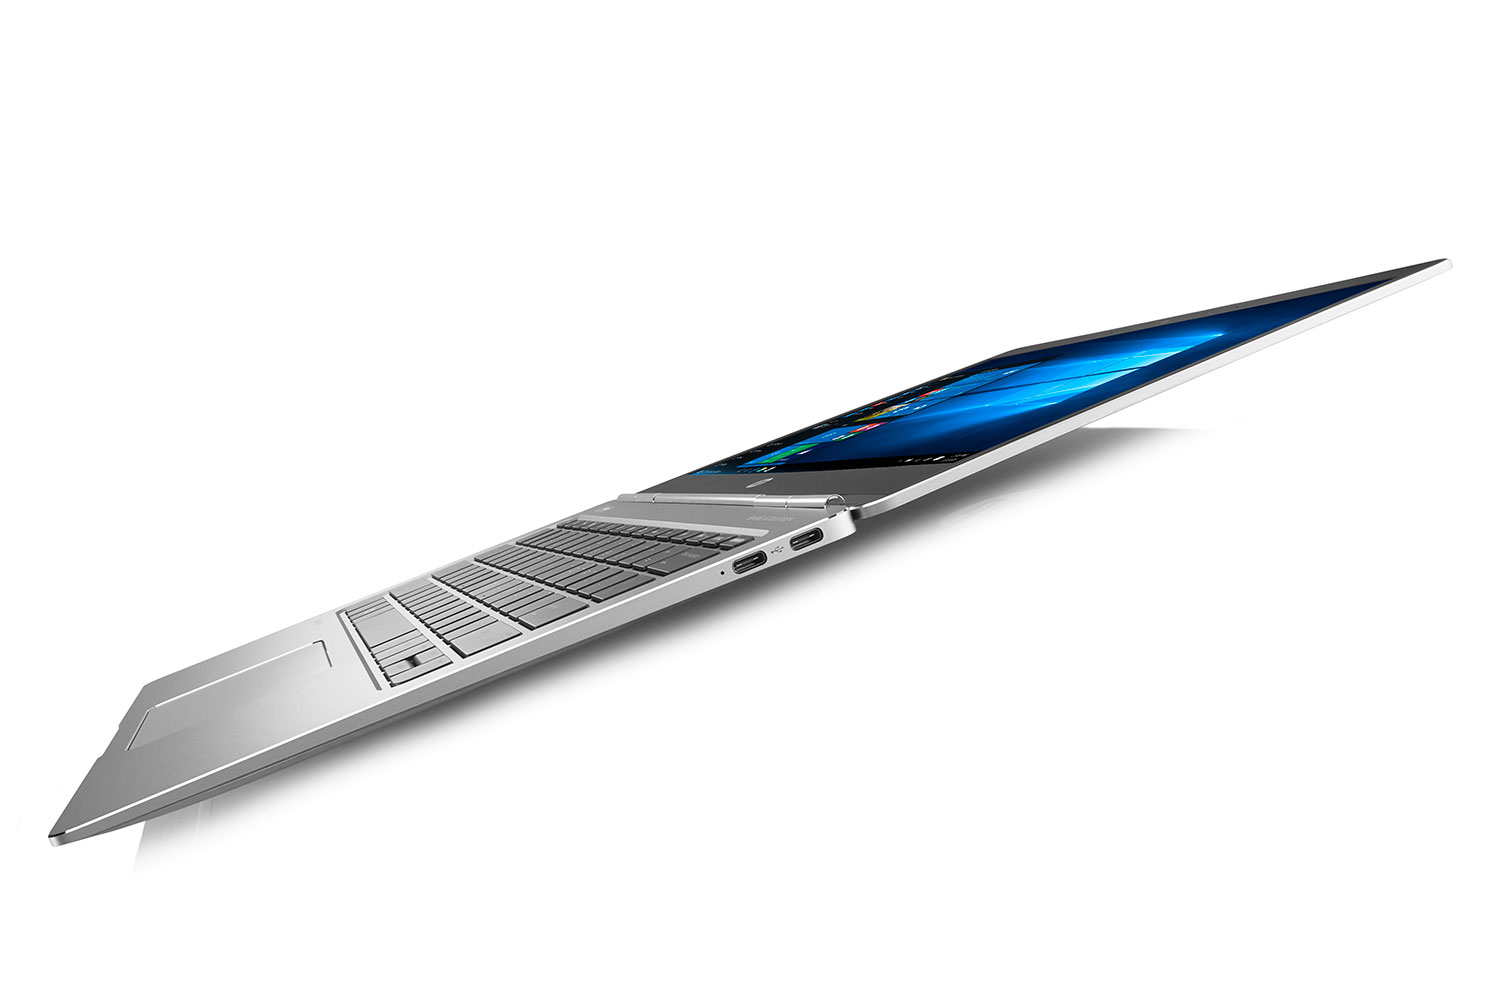 hps new elitebook folio is a half inch thick laptop with 4k display g1 2